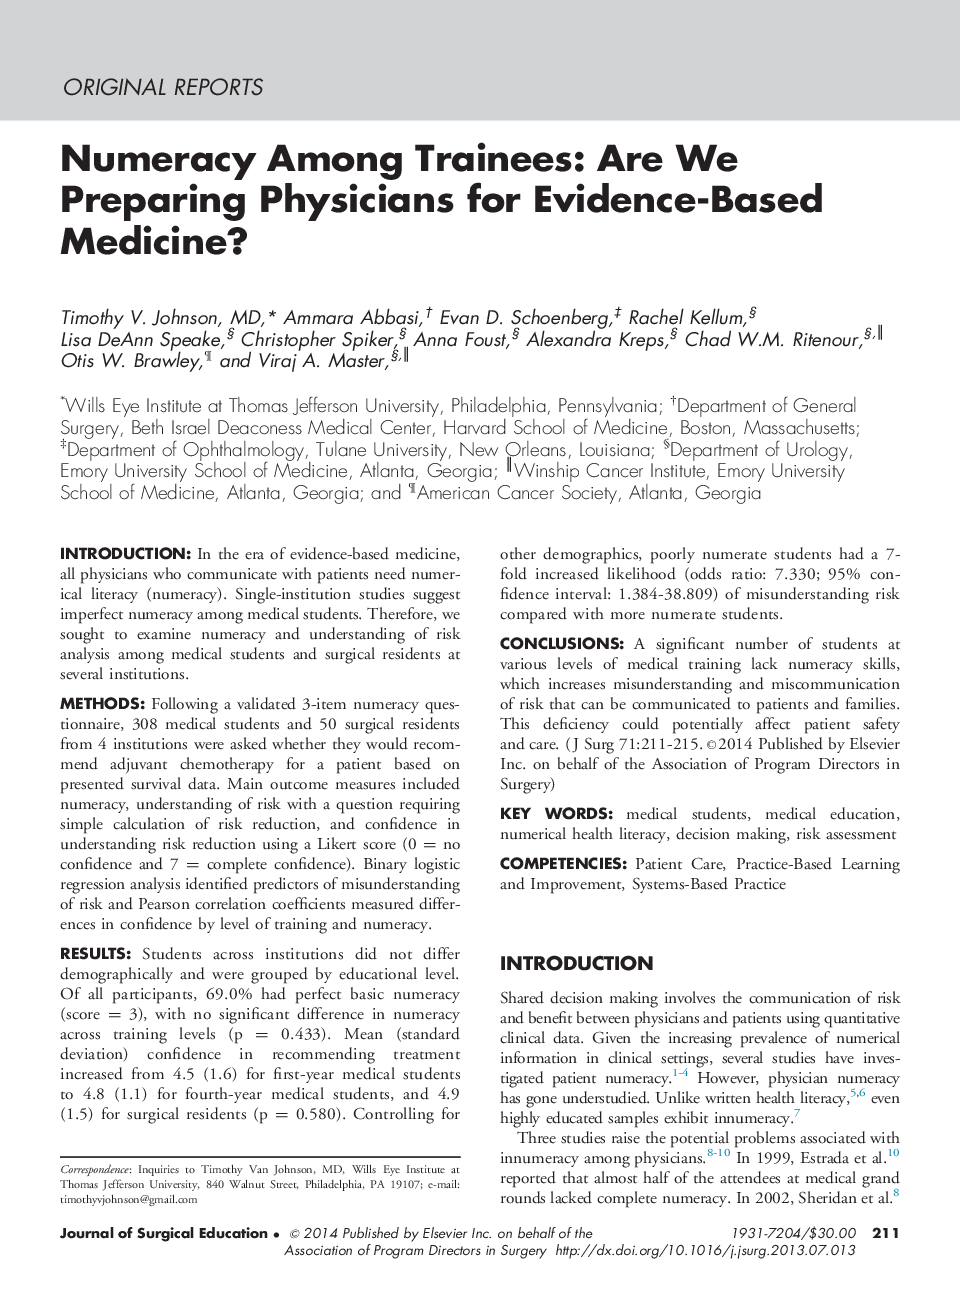 Numeracy Among Trainees: Are We Preparing Physicians for Evidence-Based Medicine?